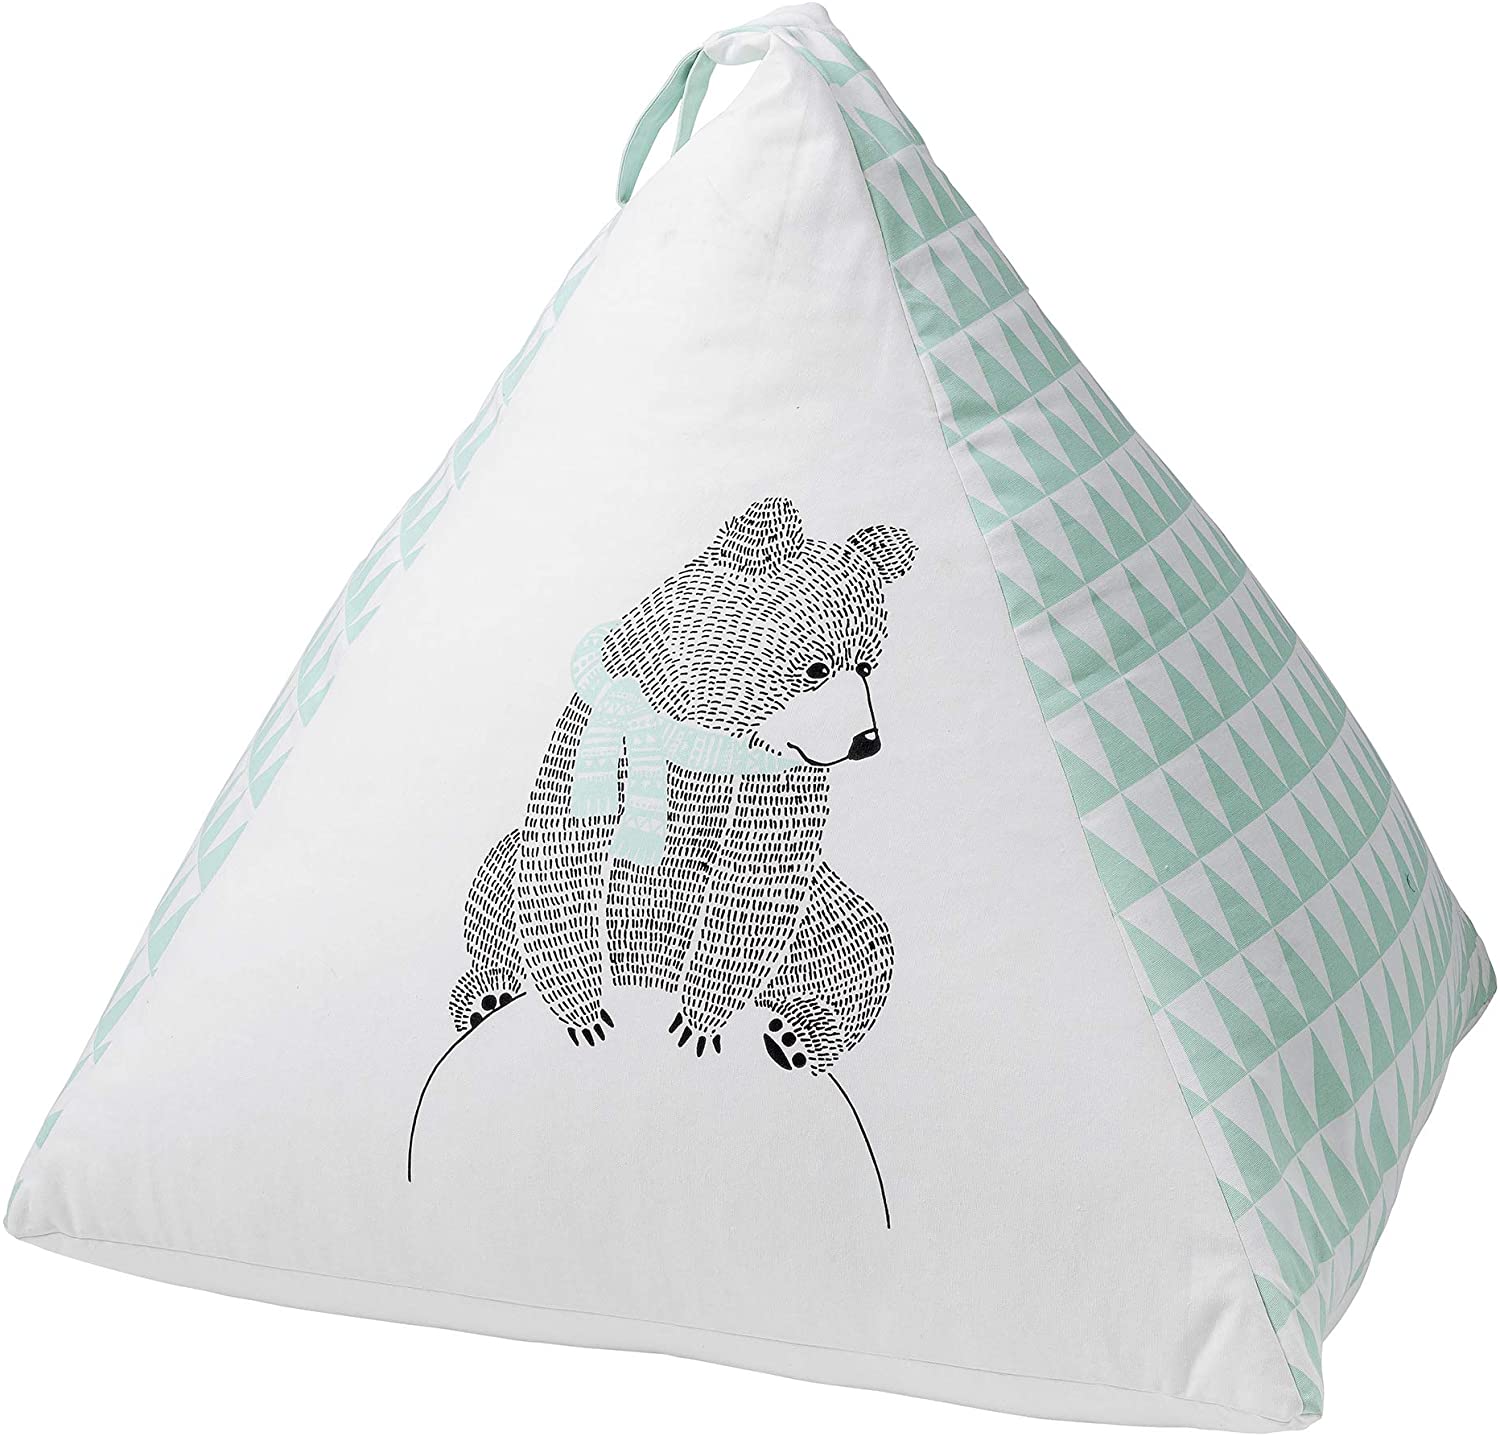 Bloomingville Bean Bag Triangle with Animal Motif for Children\'s Bedroom Lounge Chillecke